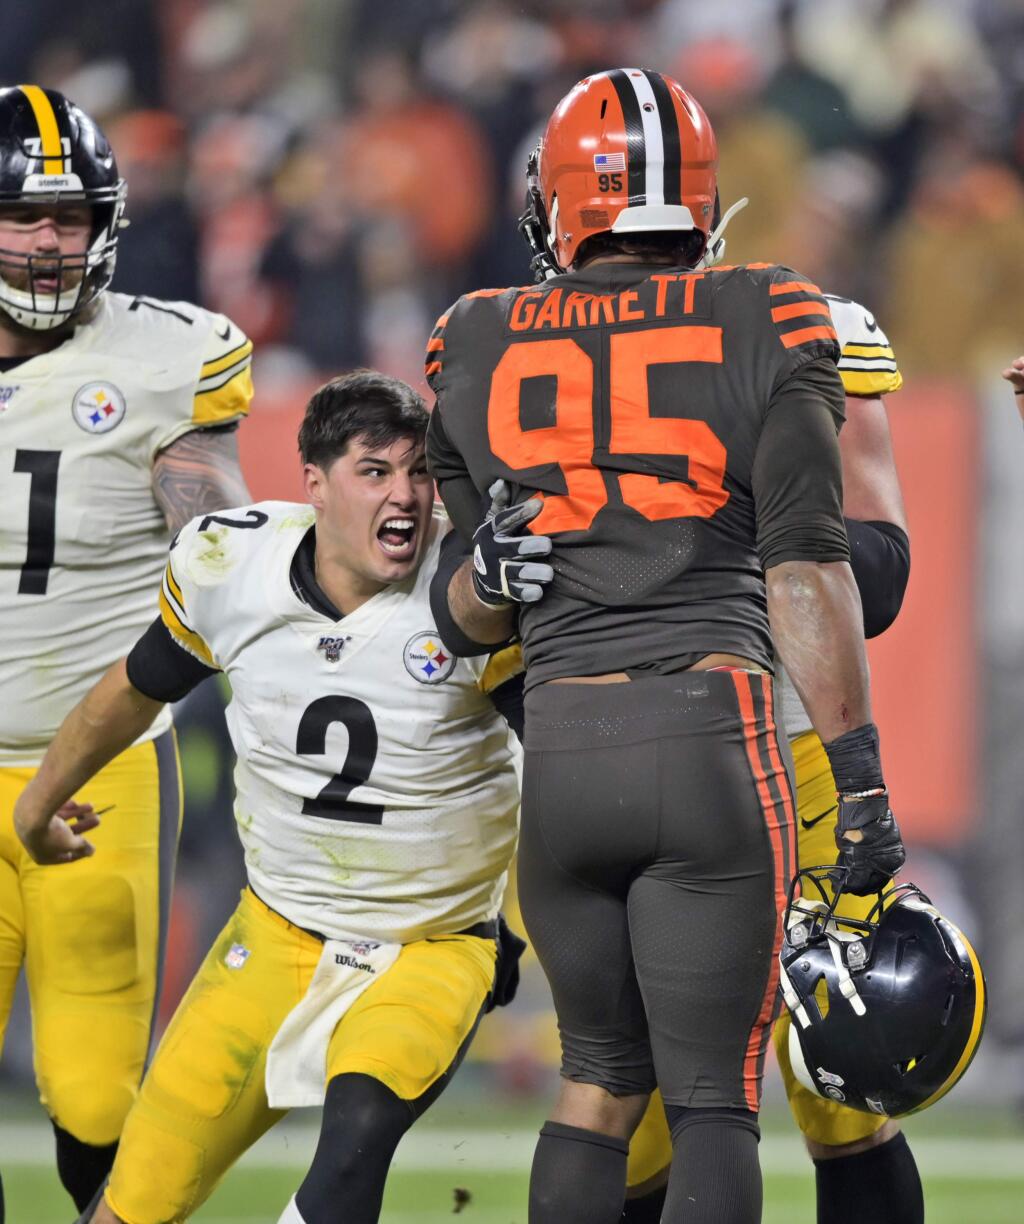 Pittsburgh Steelers quarterback Mason Rudolph (2) goes after Cleveland Browns defensive end Myles Garrett (95) during the second half of an NFL football game Thursday, Nov. 14, 2019, in Cleveland. The Browns won 21-7. (AP Photo/David Richard)